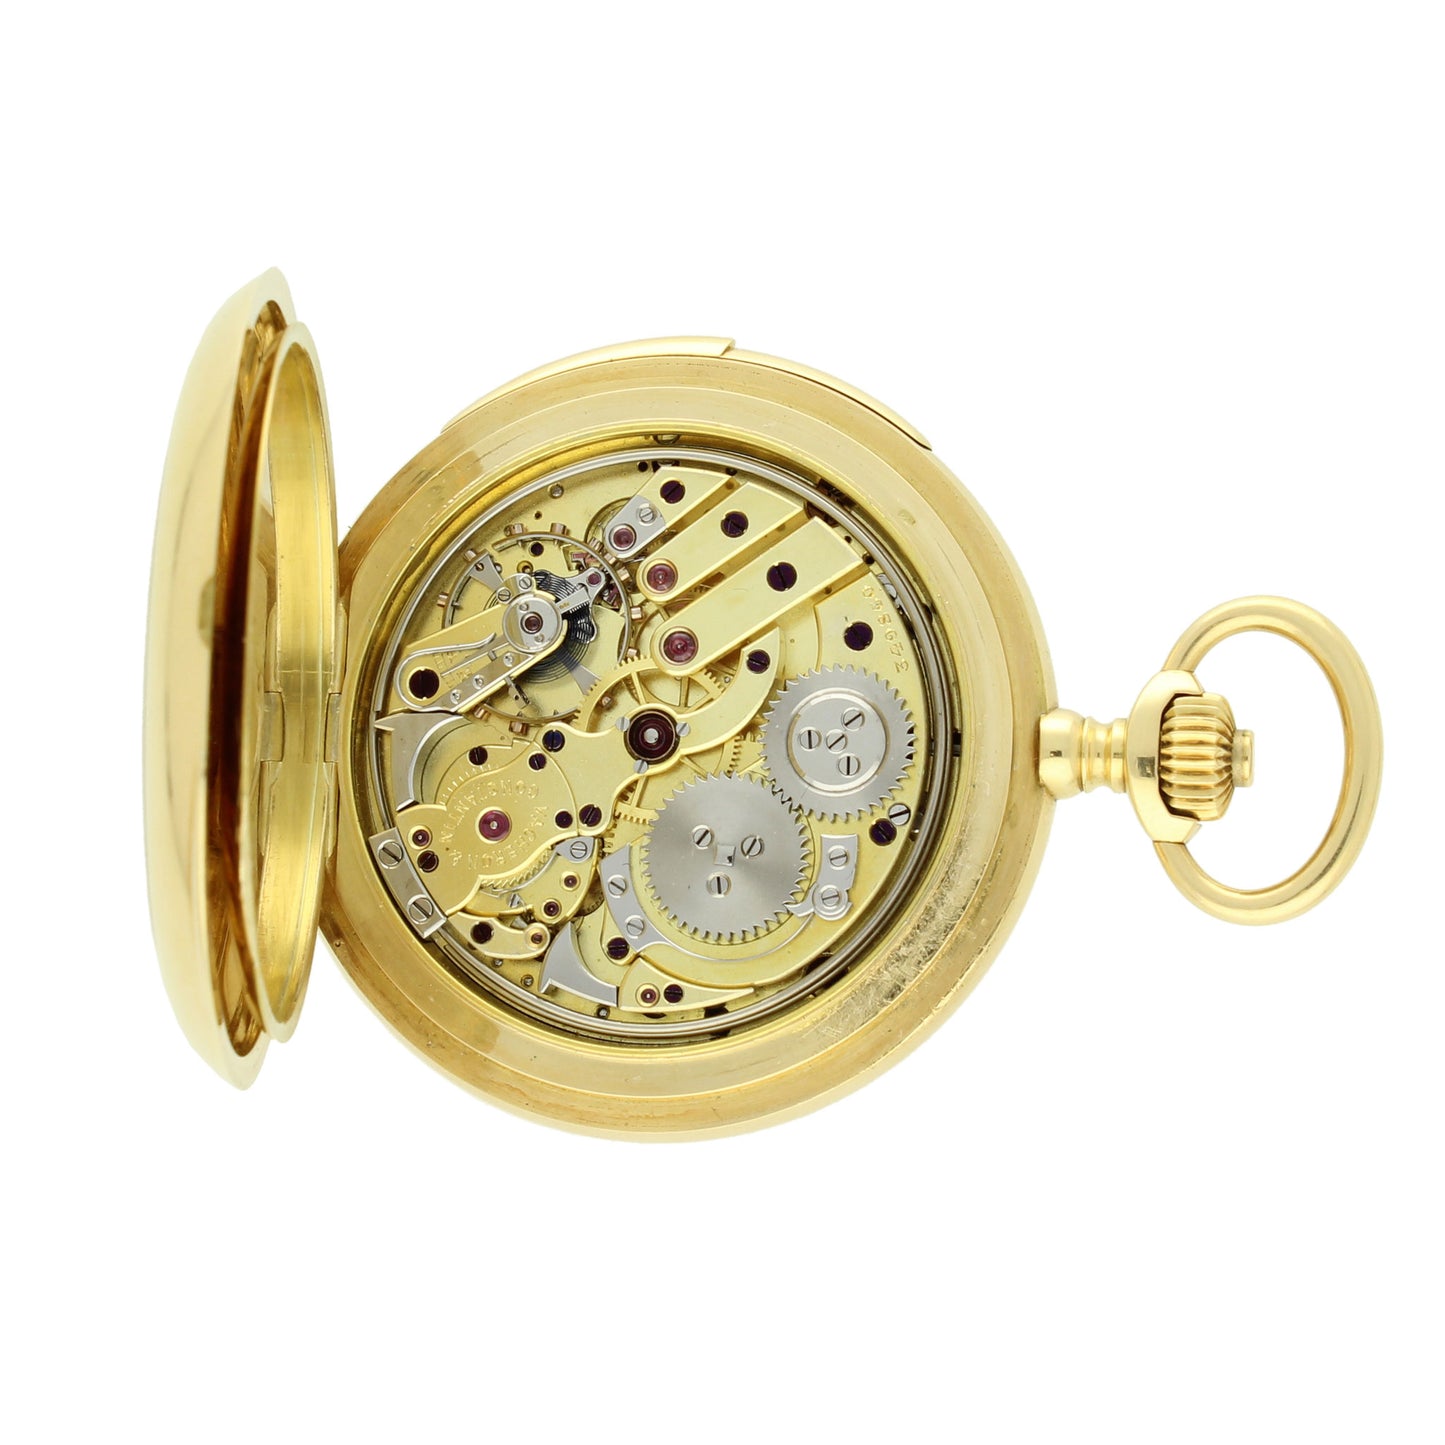 18ct yellow gold hunter case minute repeating, triple date calendar pocket watch with moonphases. Made 1916